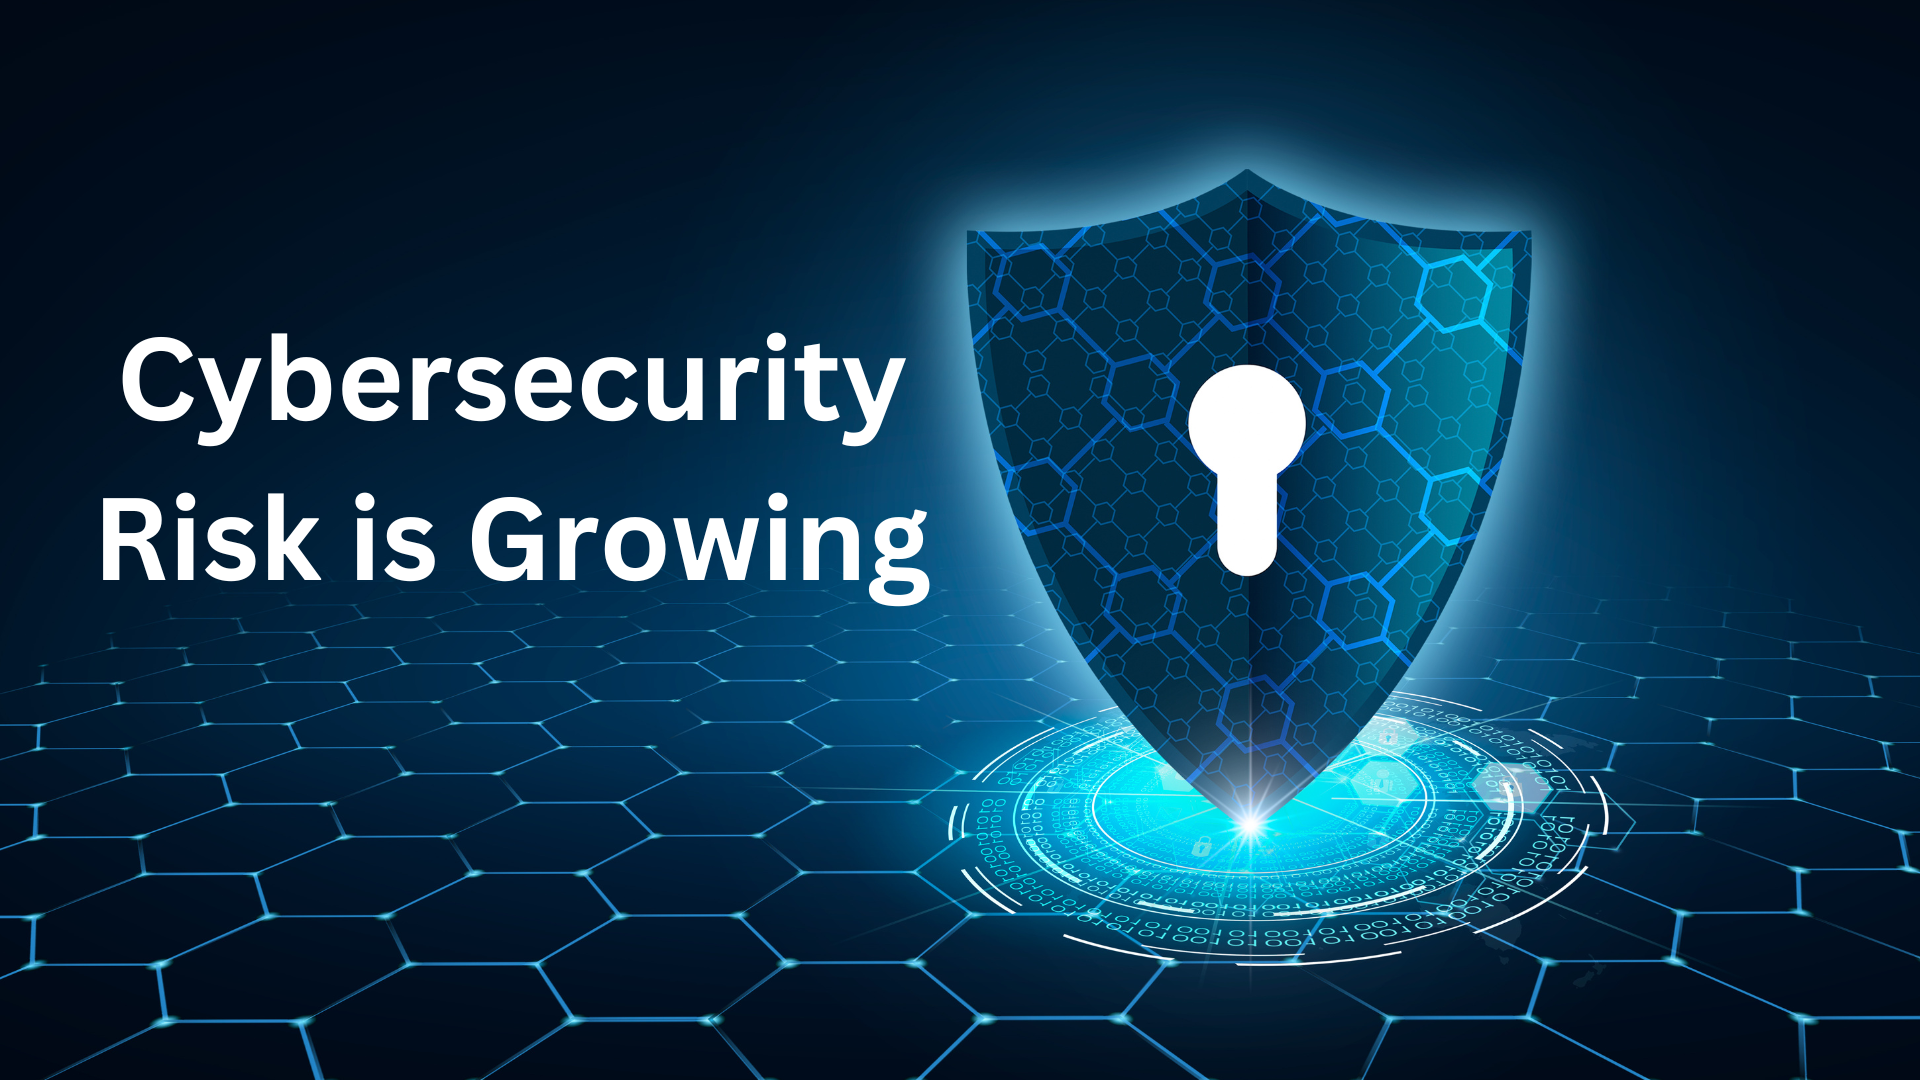 Cybersecurity risk is growing